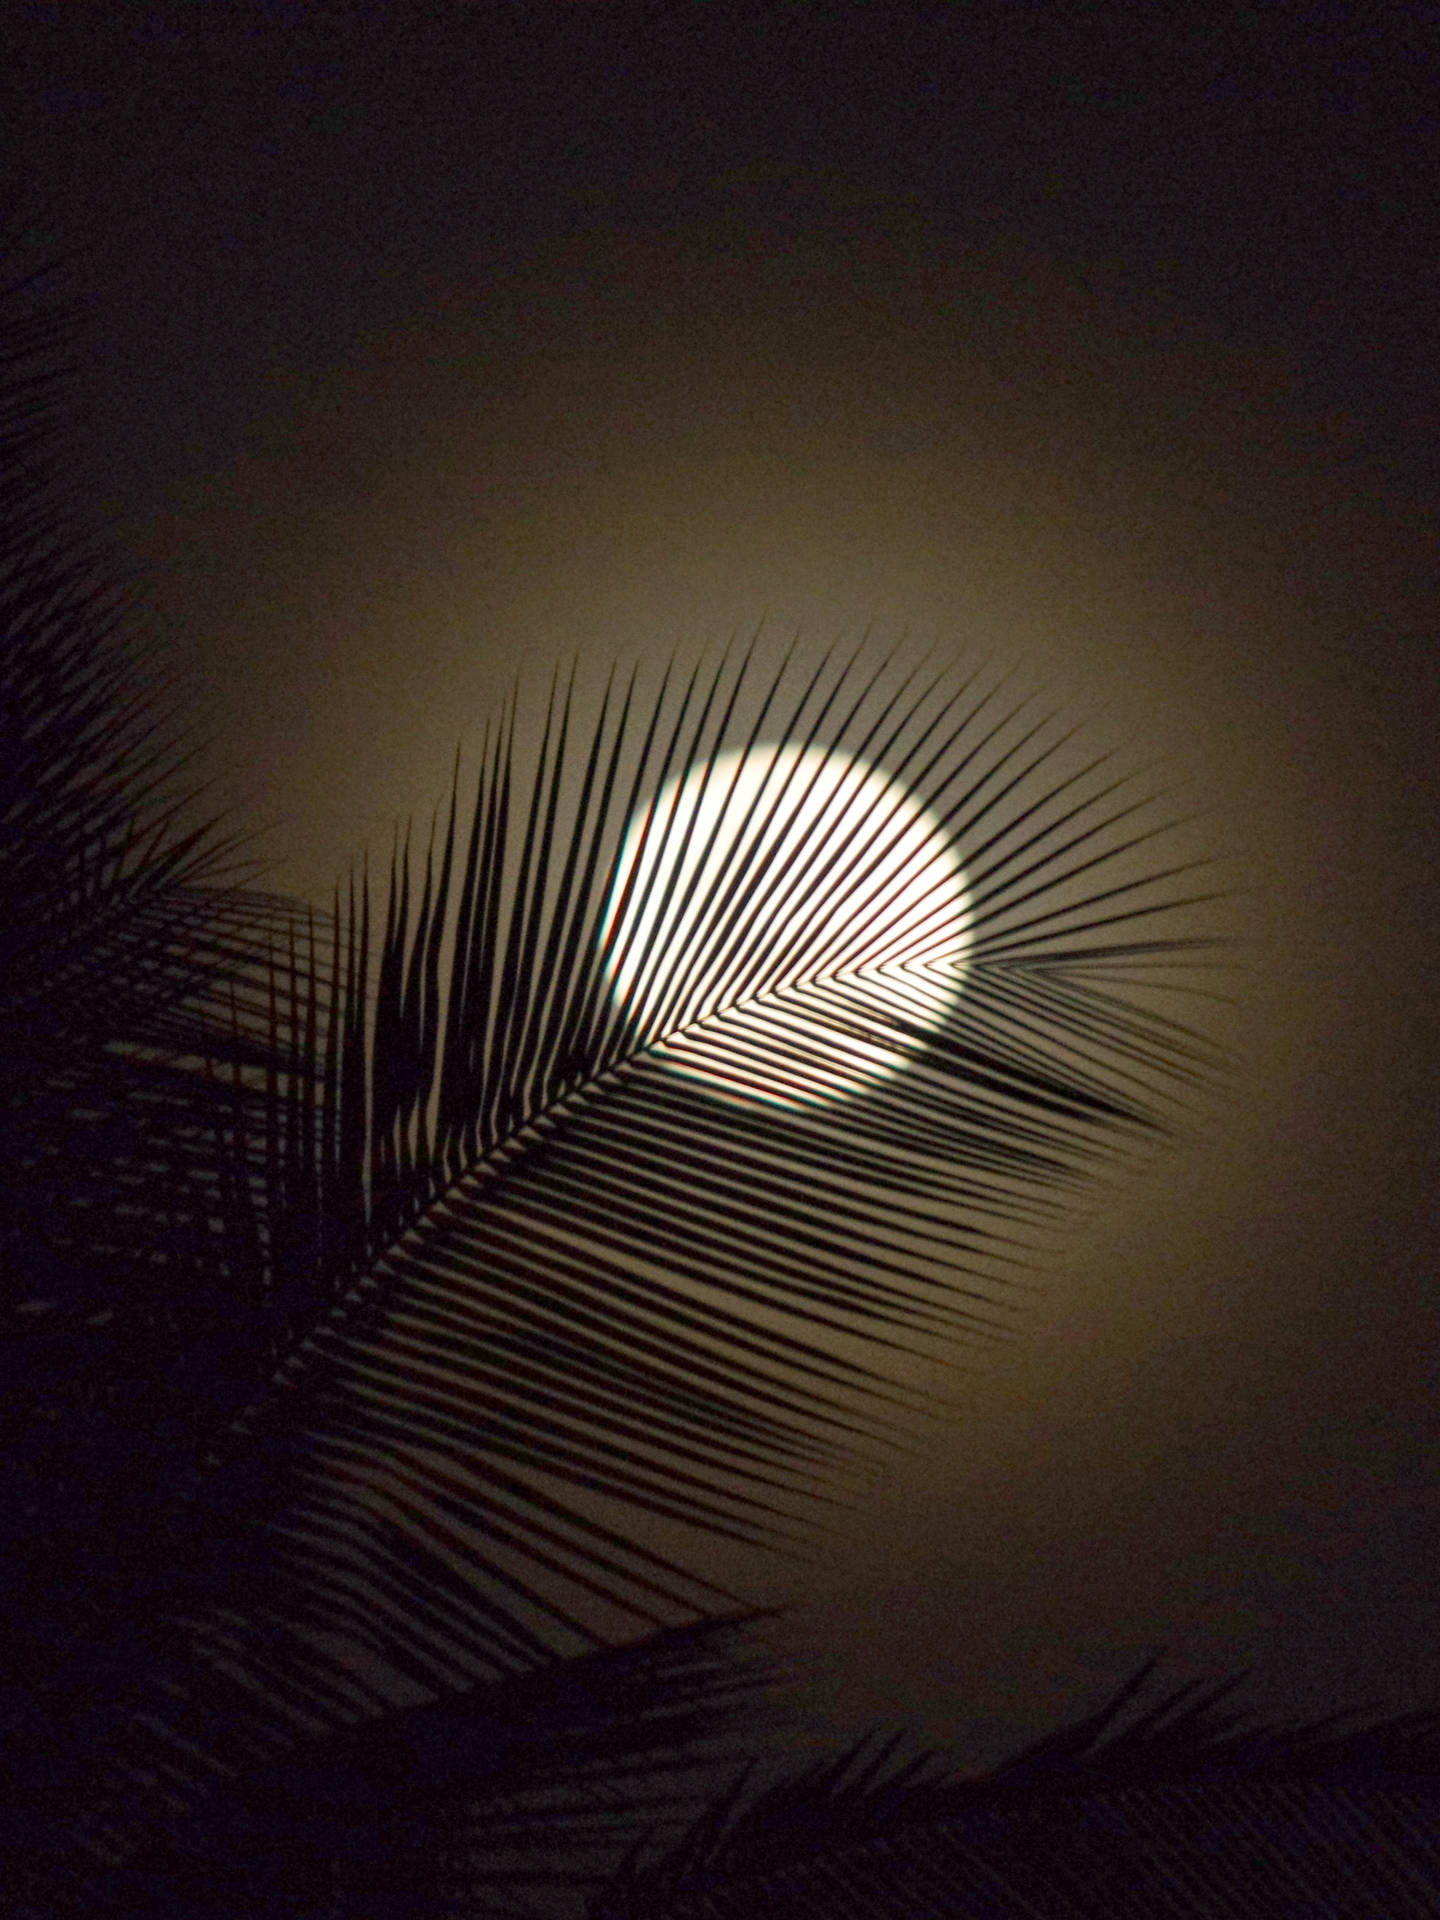 Hd Moon Behind Palm Leaves Background